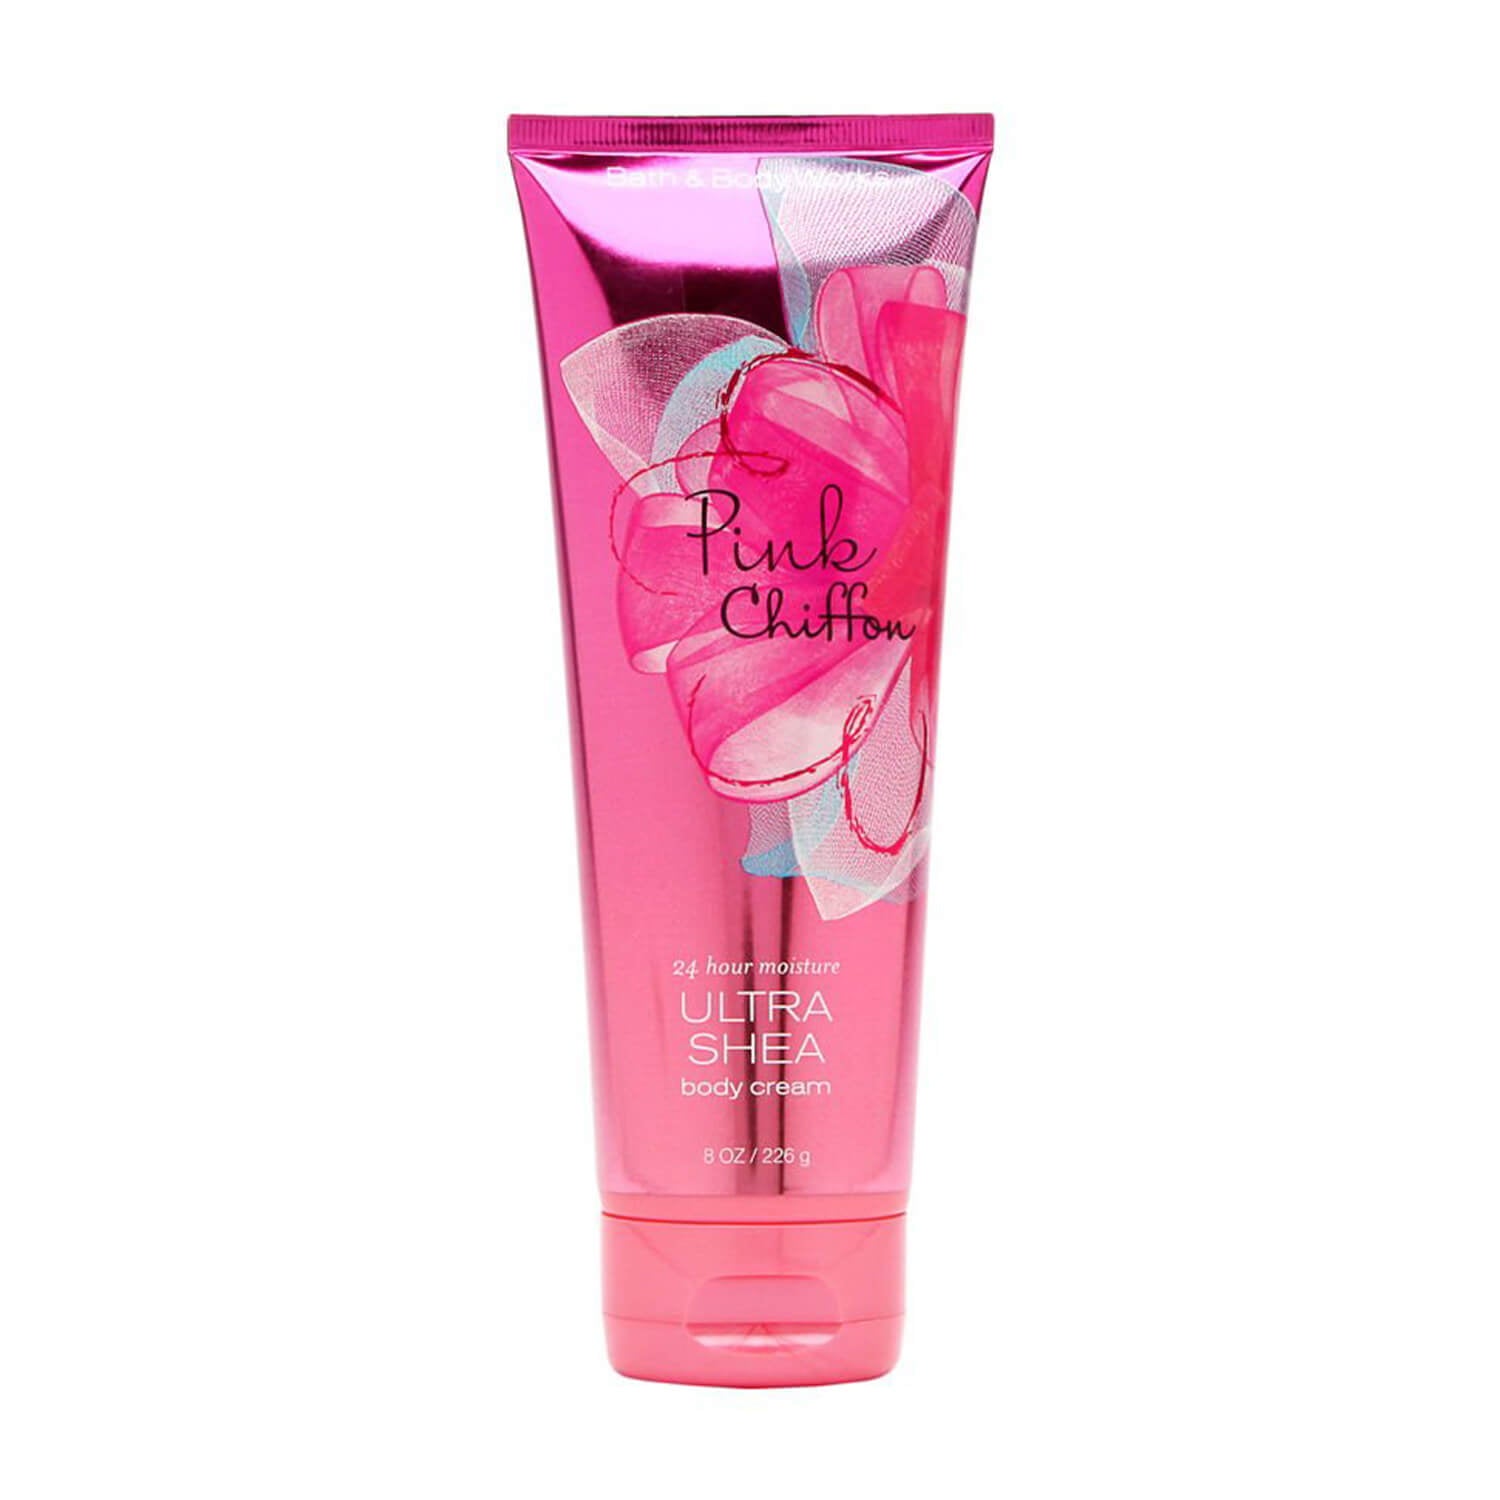 shop bath and body works body cream in pink chiffon available at heygirl.pk for delivery in Pakistan